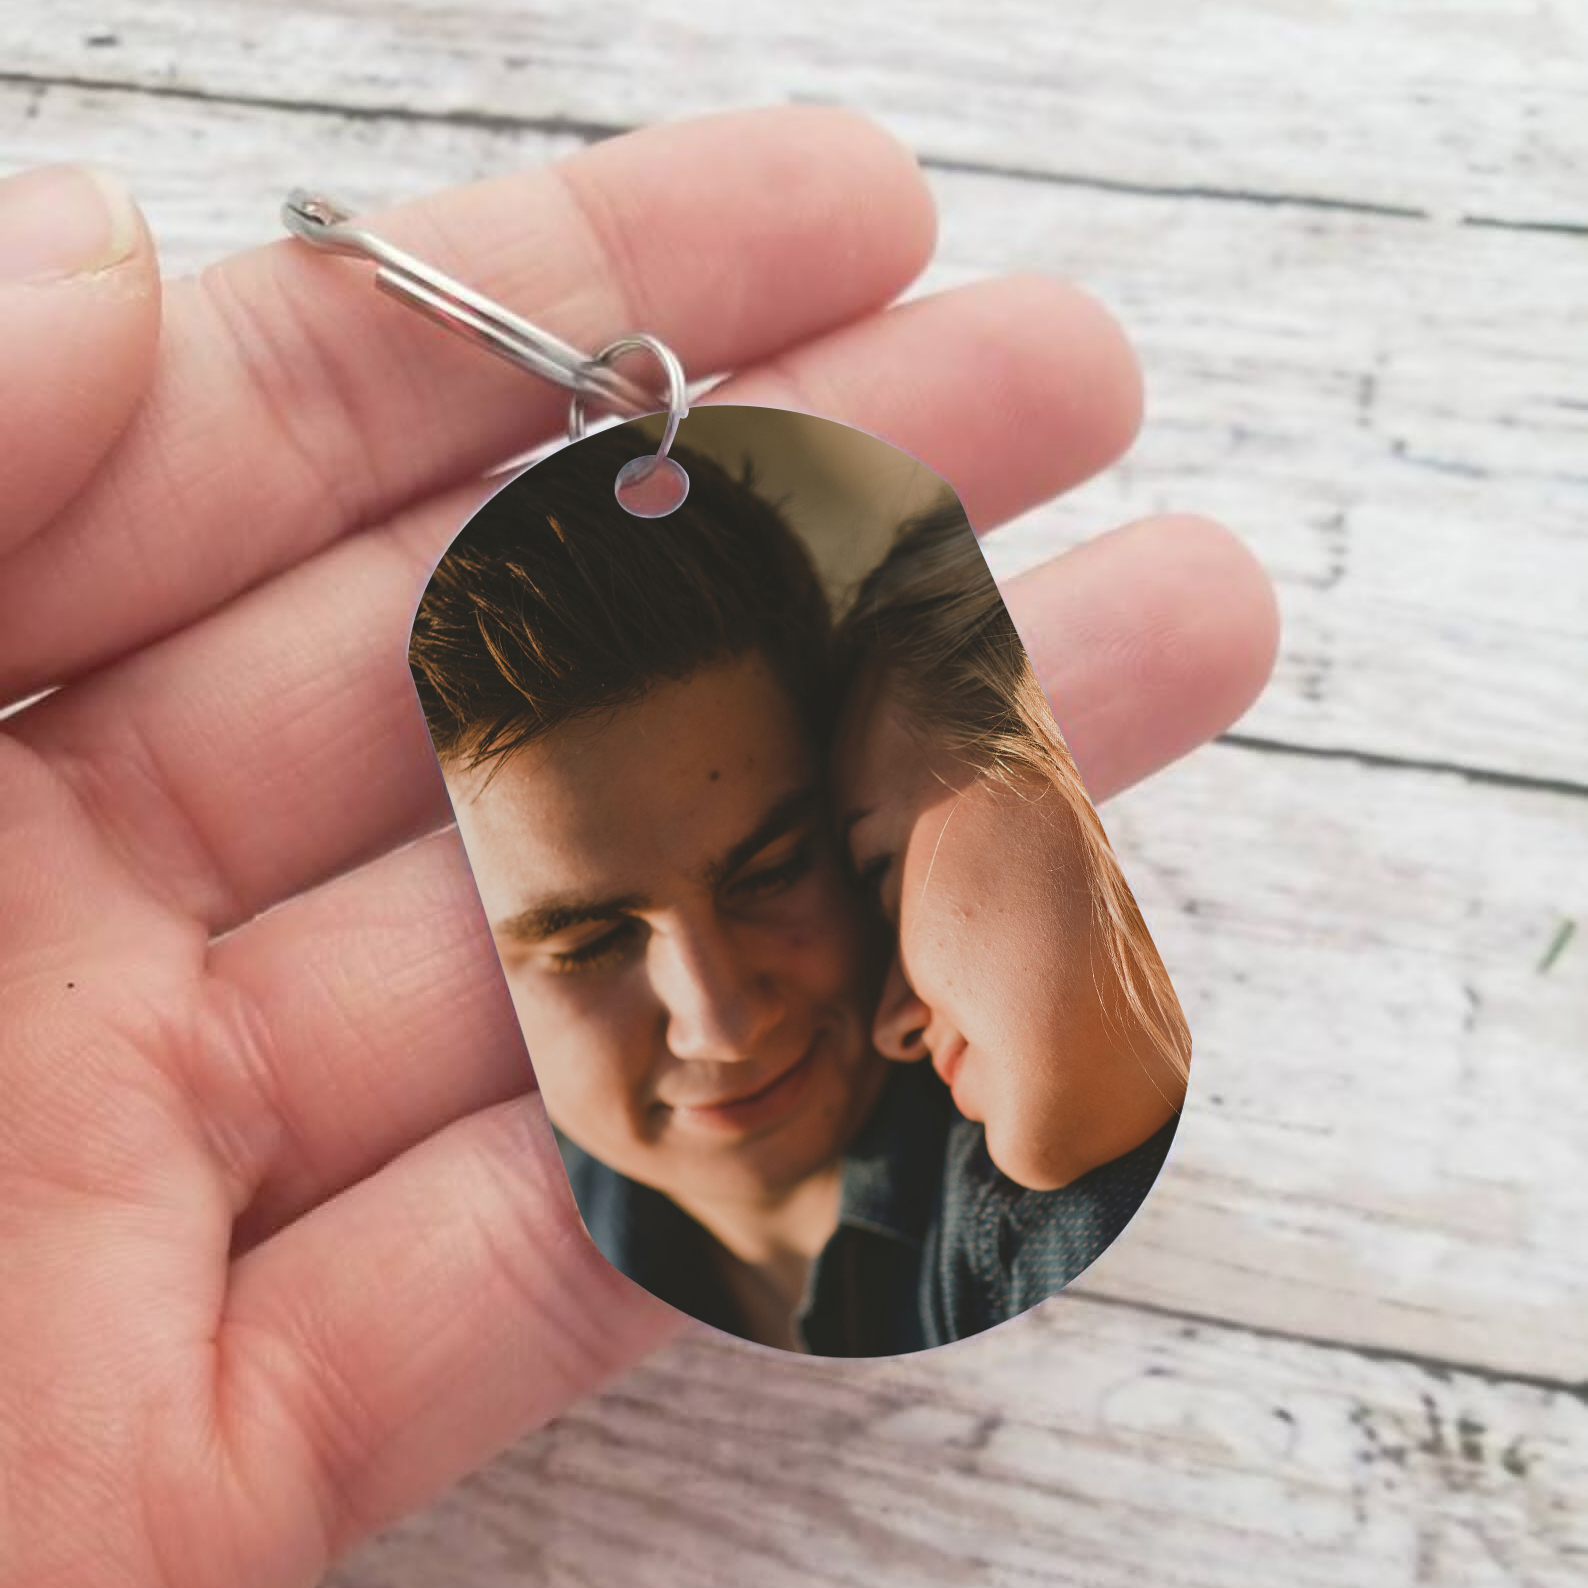 Personalized Photo Hook Couple Keychain Gift Custom Name And Text Special Keychain Gift For Him/Her